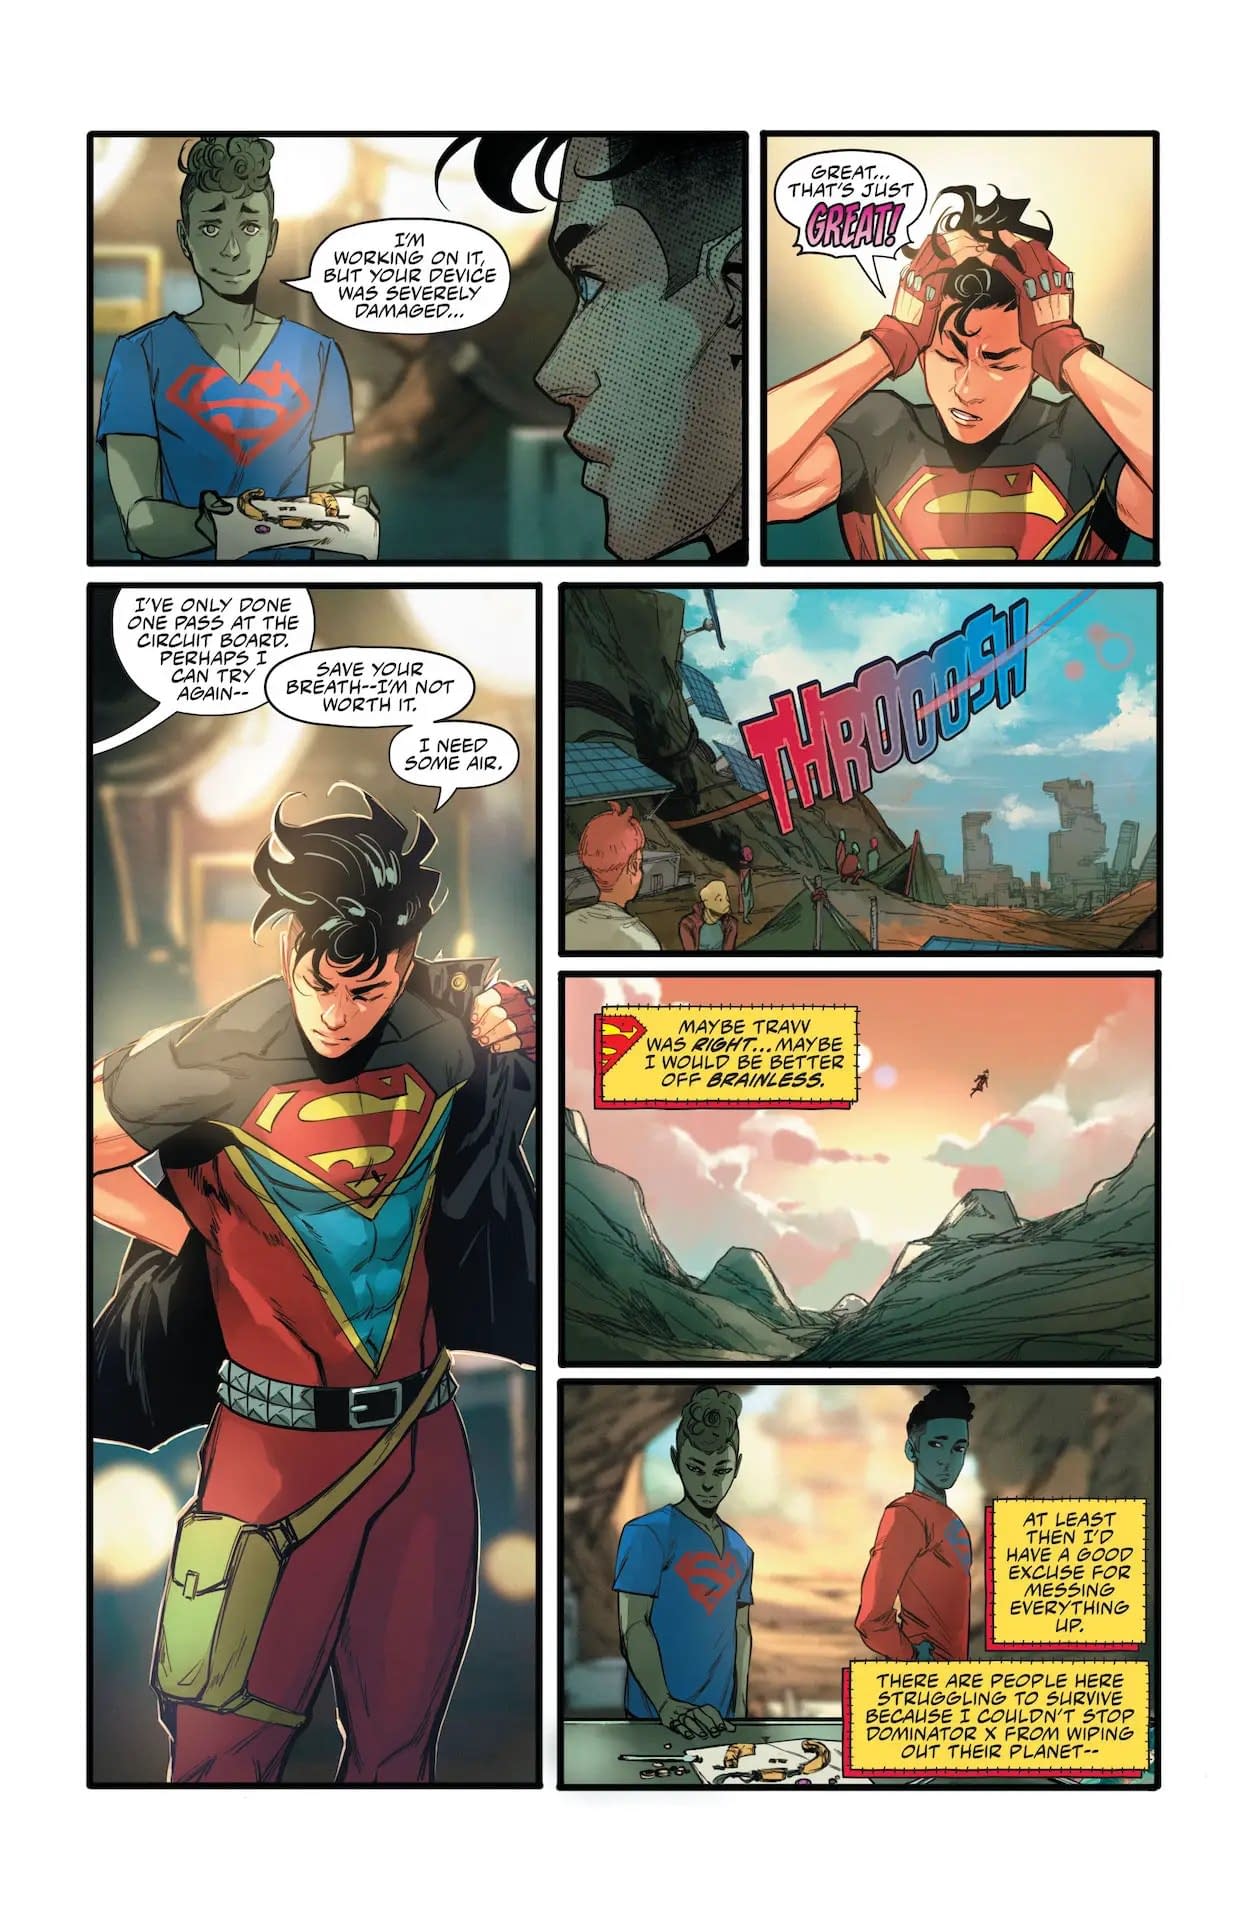 Superboy: The Man Of Tomorrow #5 Preview: Who Needs Space GPS?